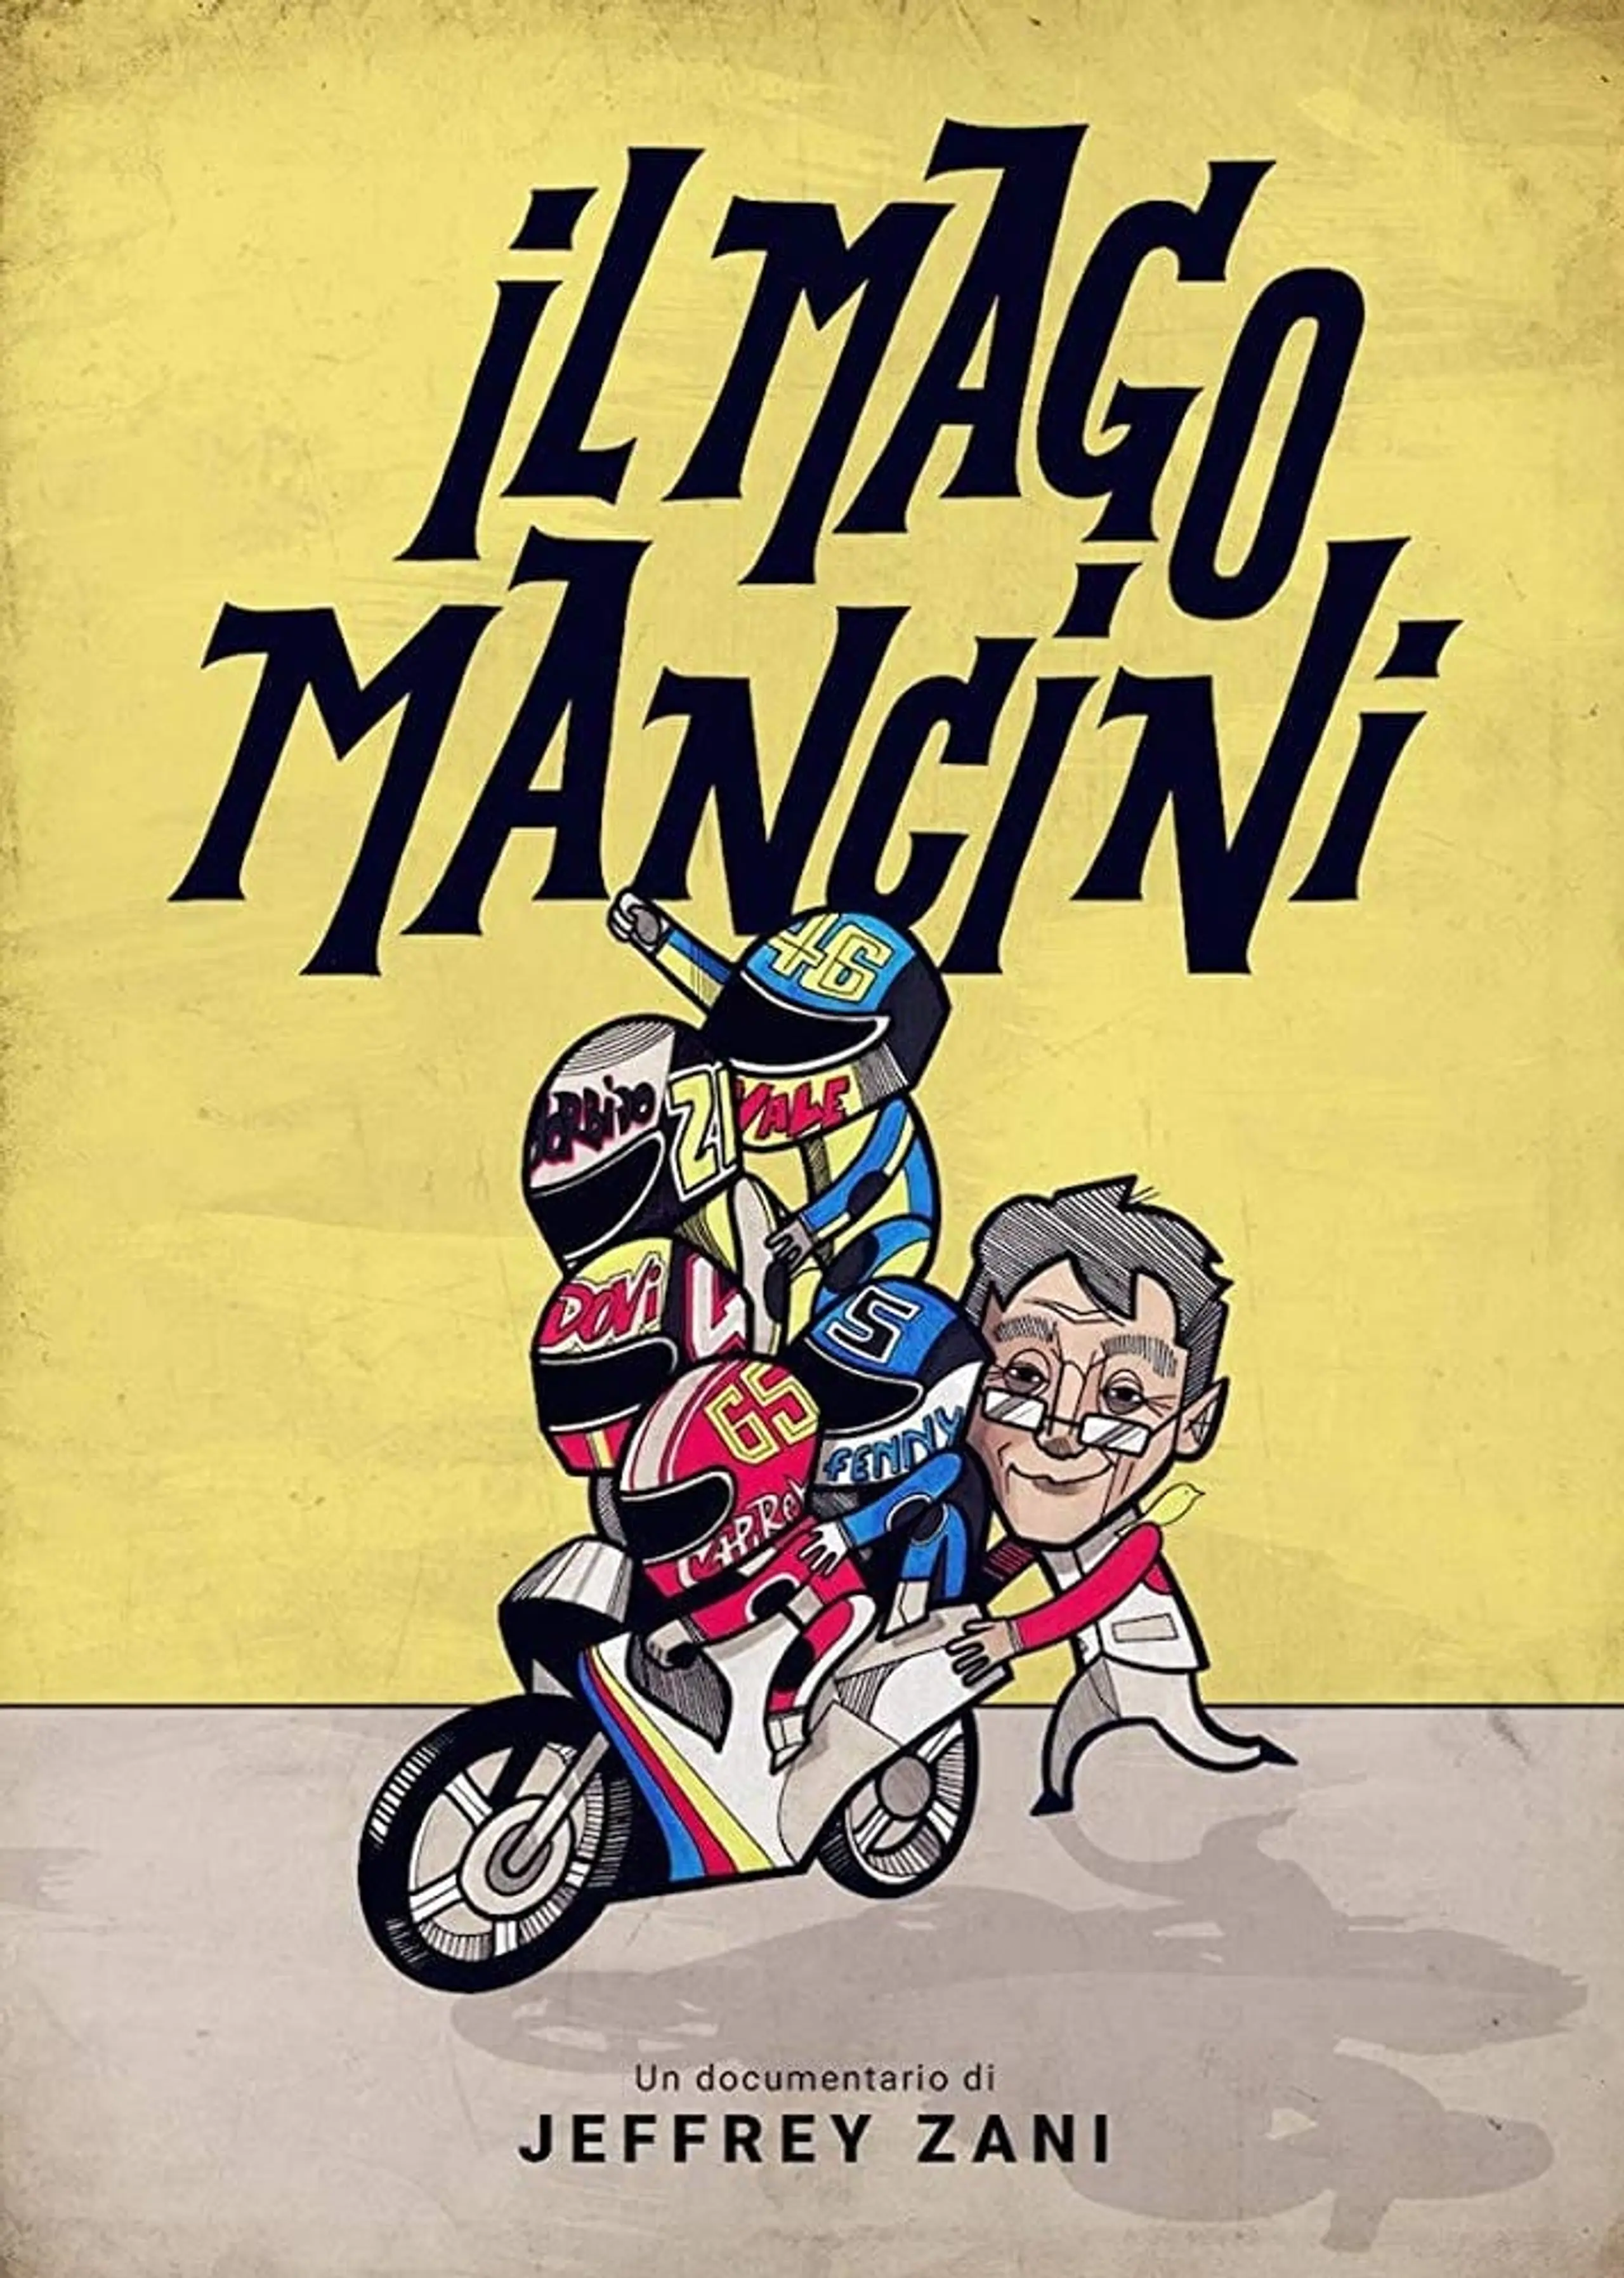 Mancini, the Motorcycle Wizard